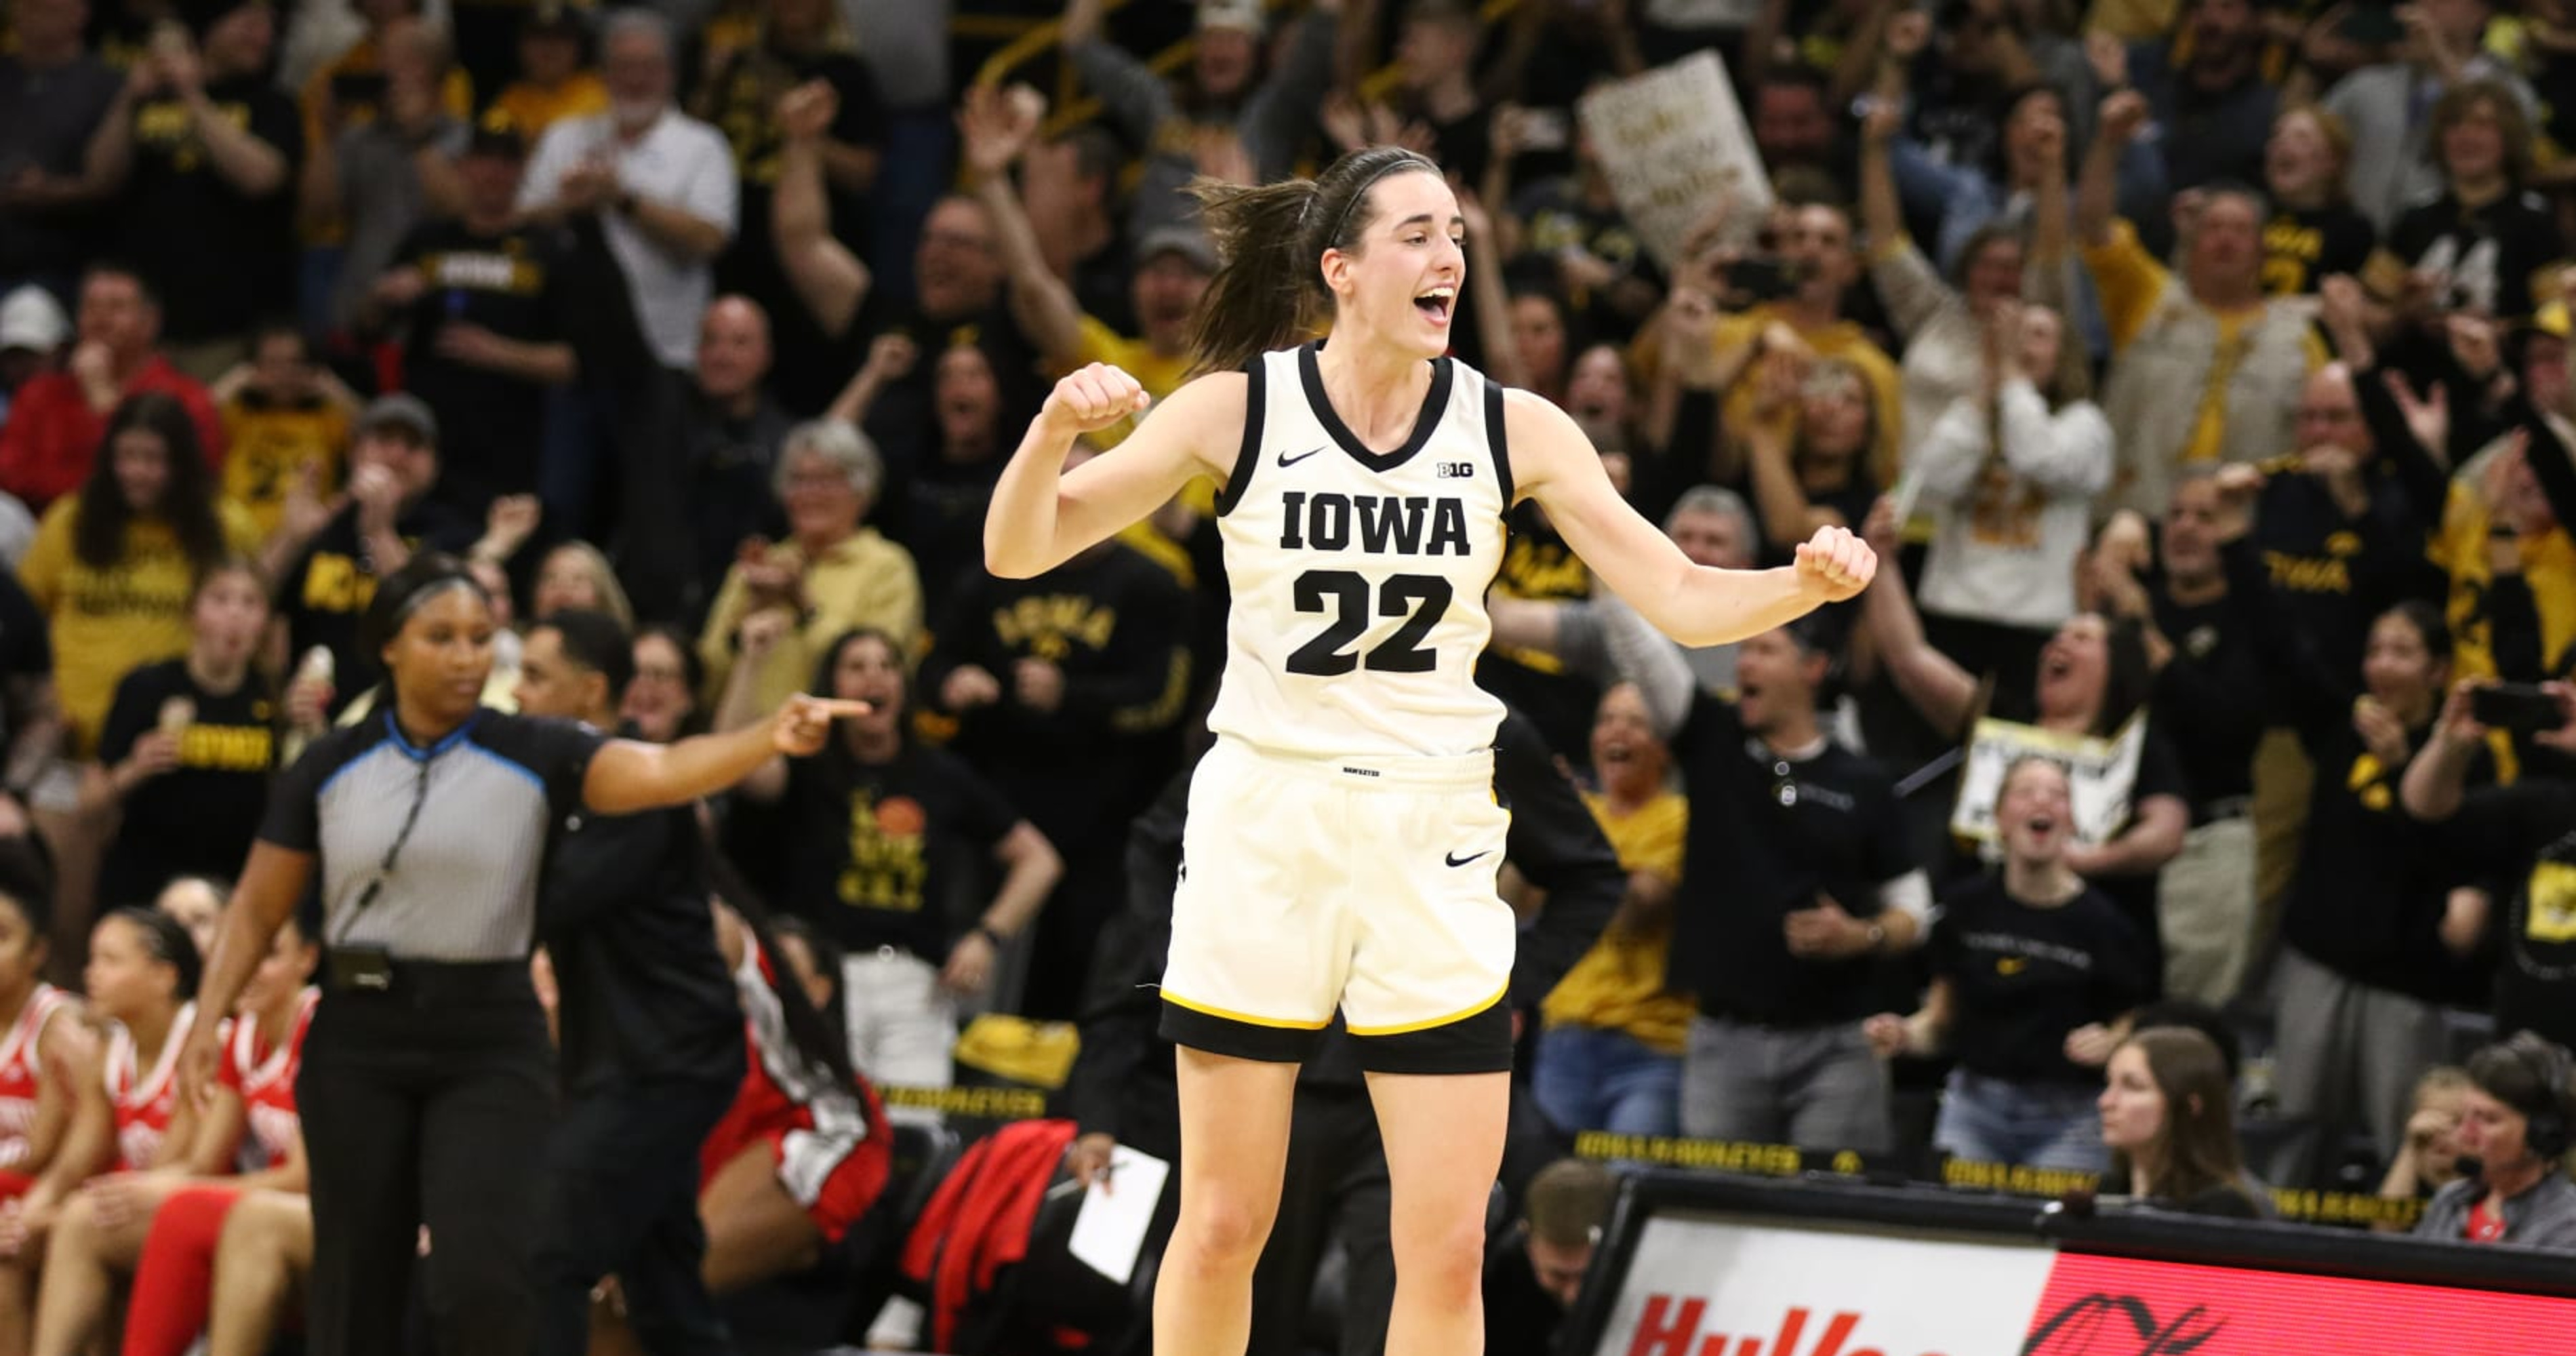 Video: Caitlin Clark Celebrated in Nike Commercial After Breaking NCAA Scoring Record